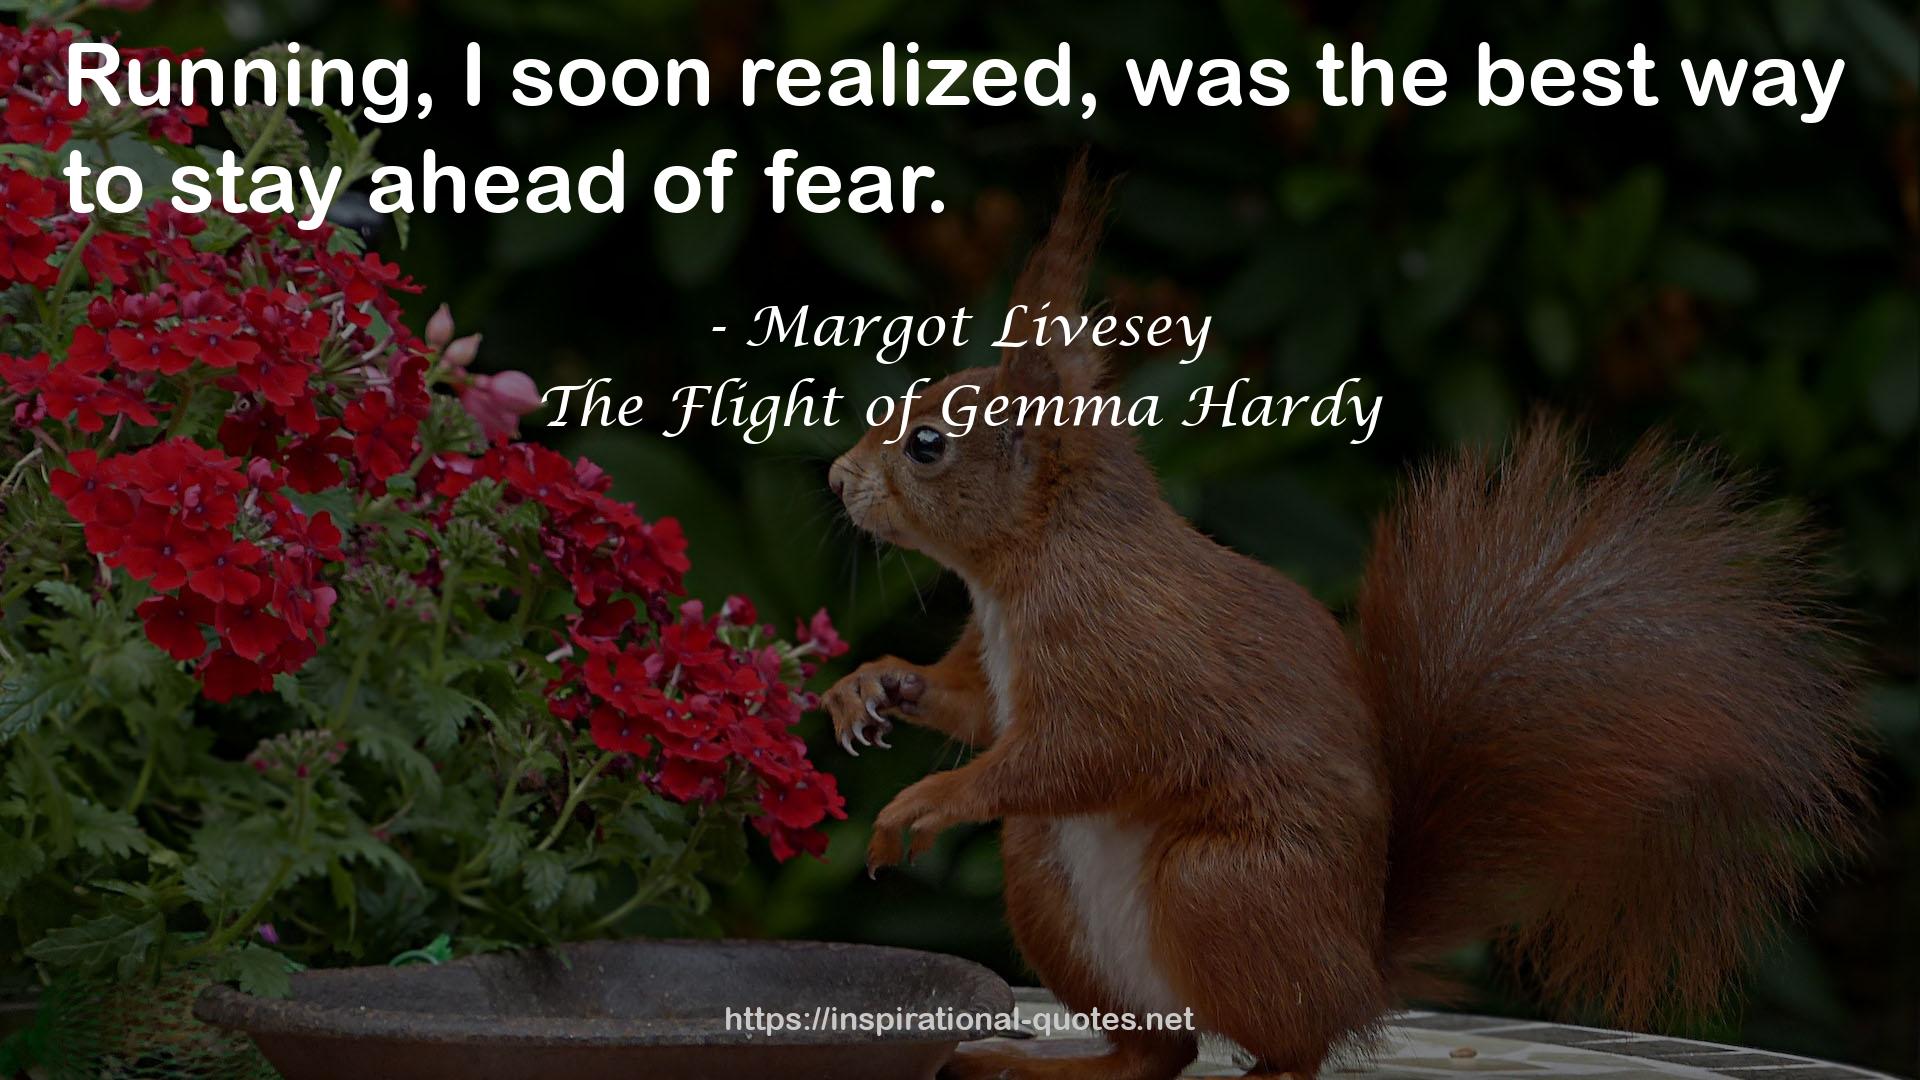 The Flight of Gemma Hardy QUOTES